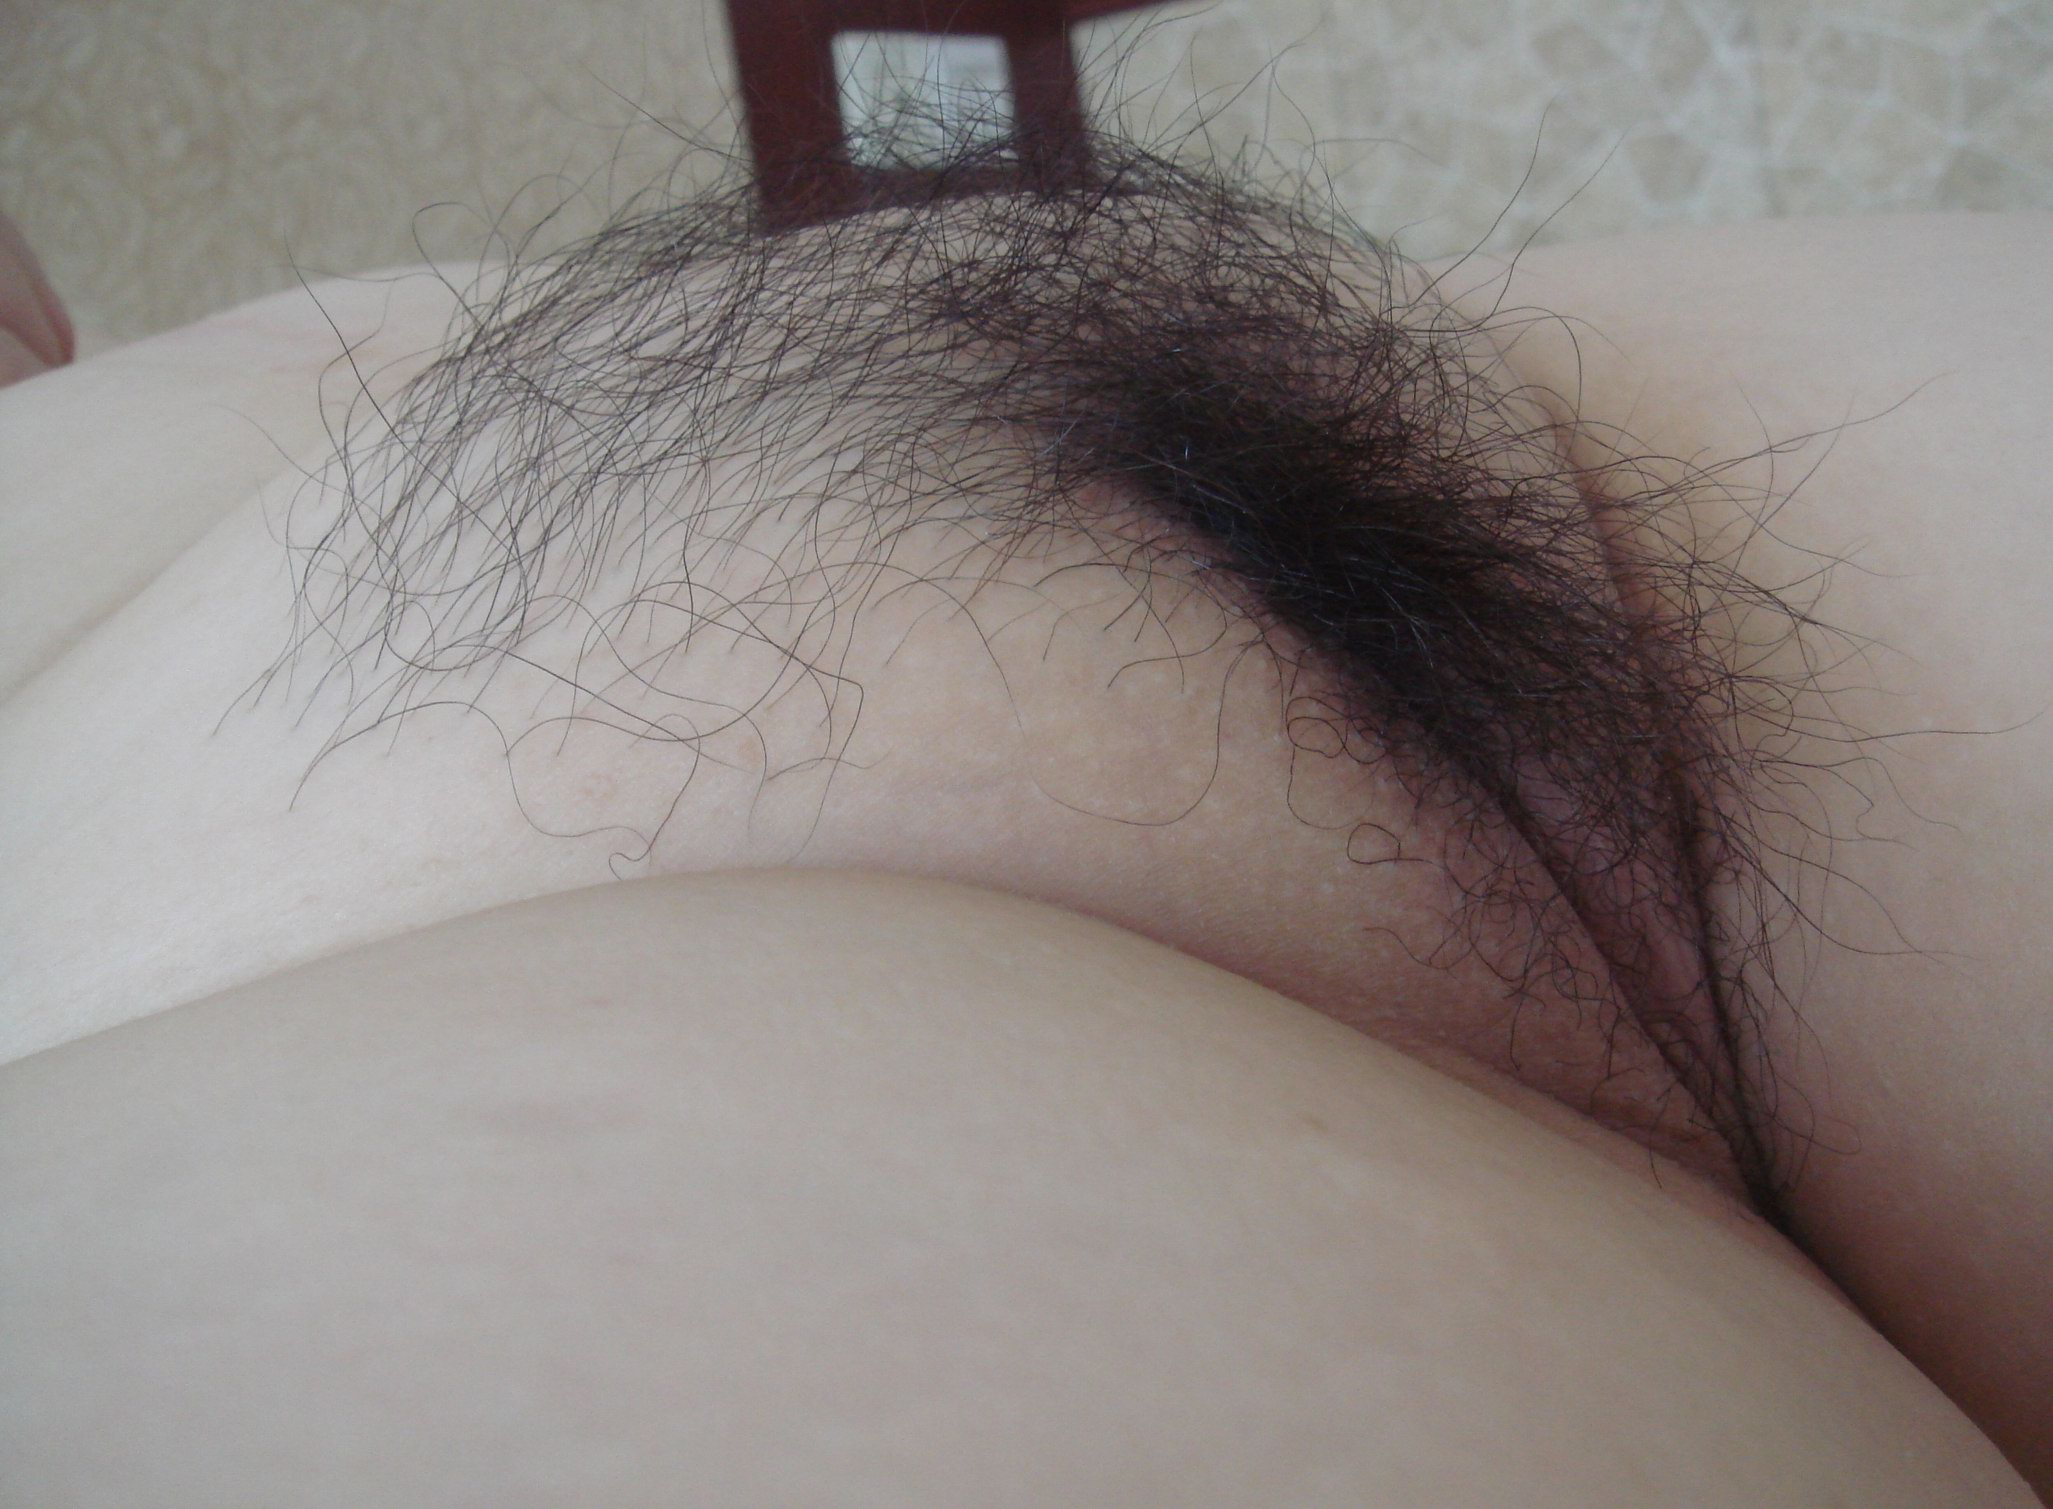 Hairy Oriental Pussy - Hairy Chinese Pussy and Mound Up-Close Nude Girls Pictures